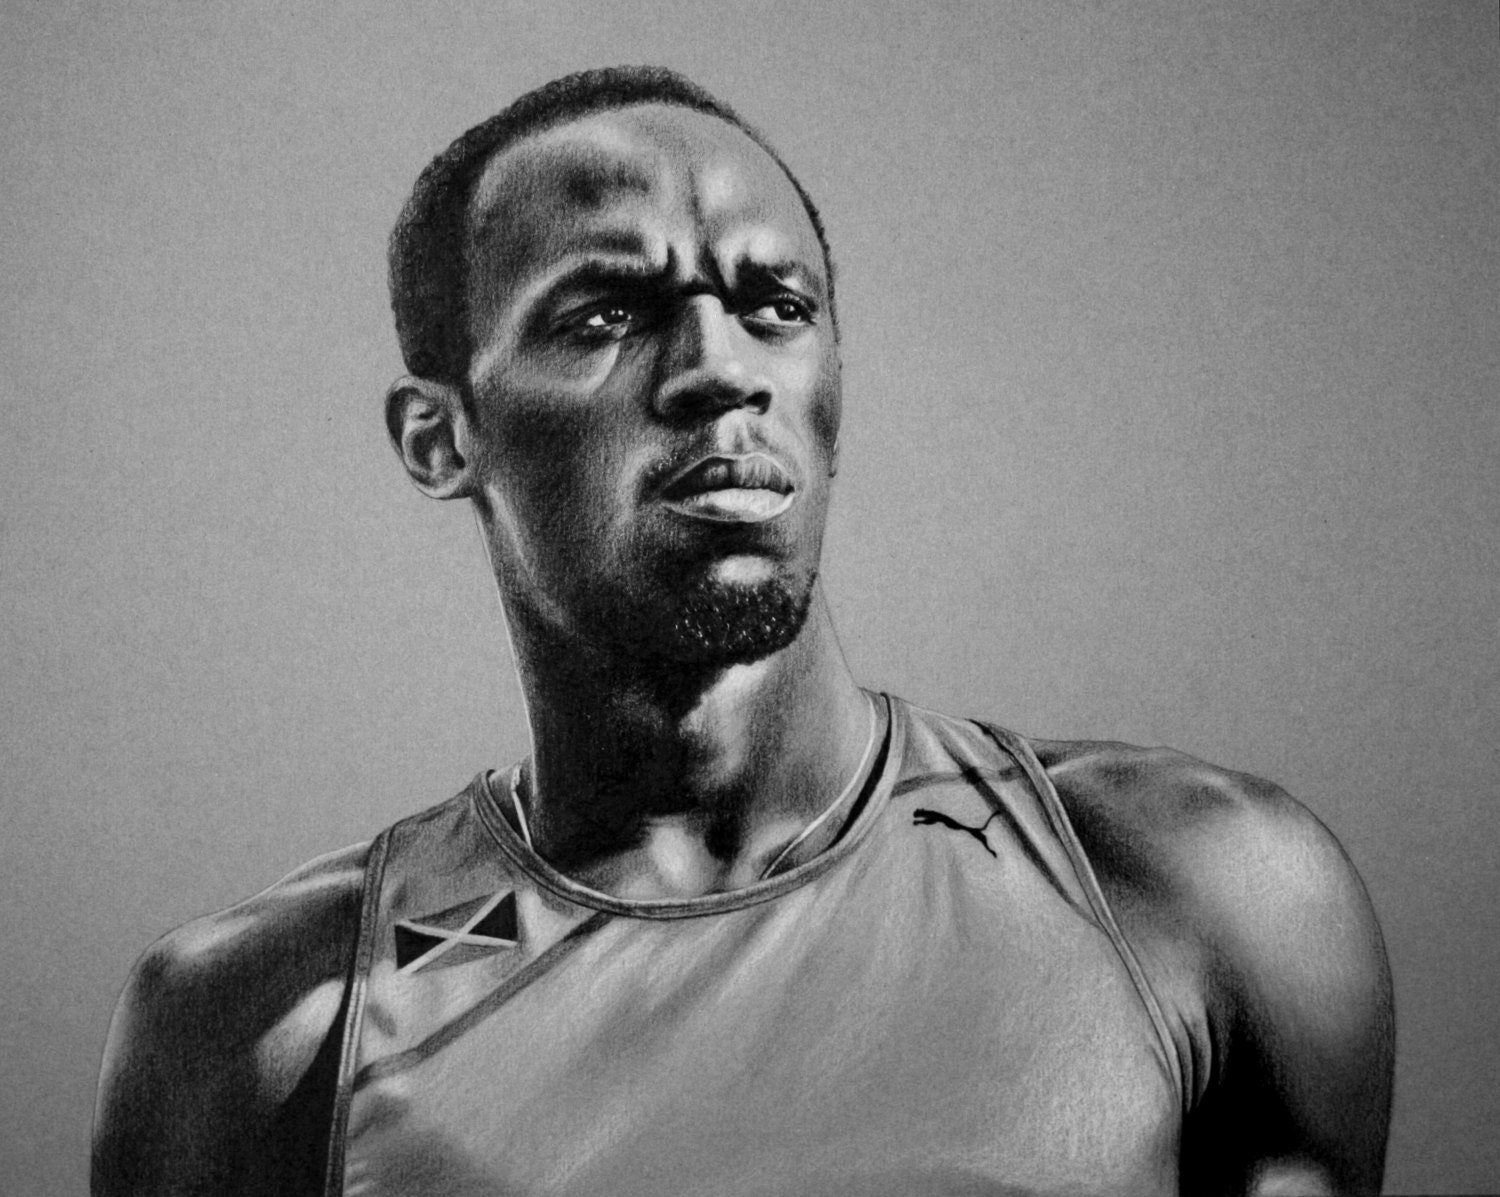 My drawing of Usain Bolt : r/drawing